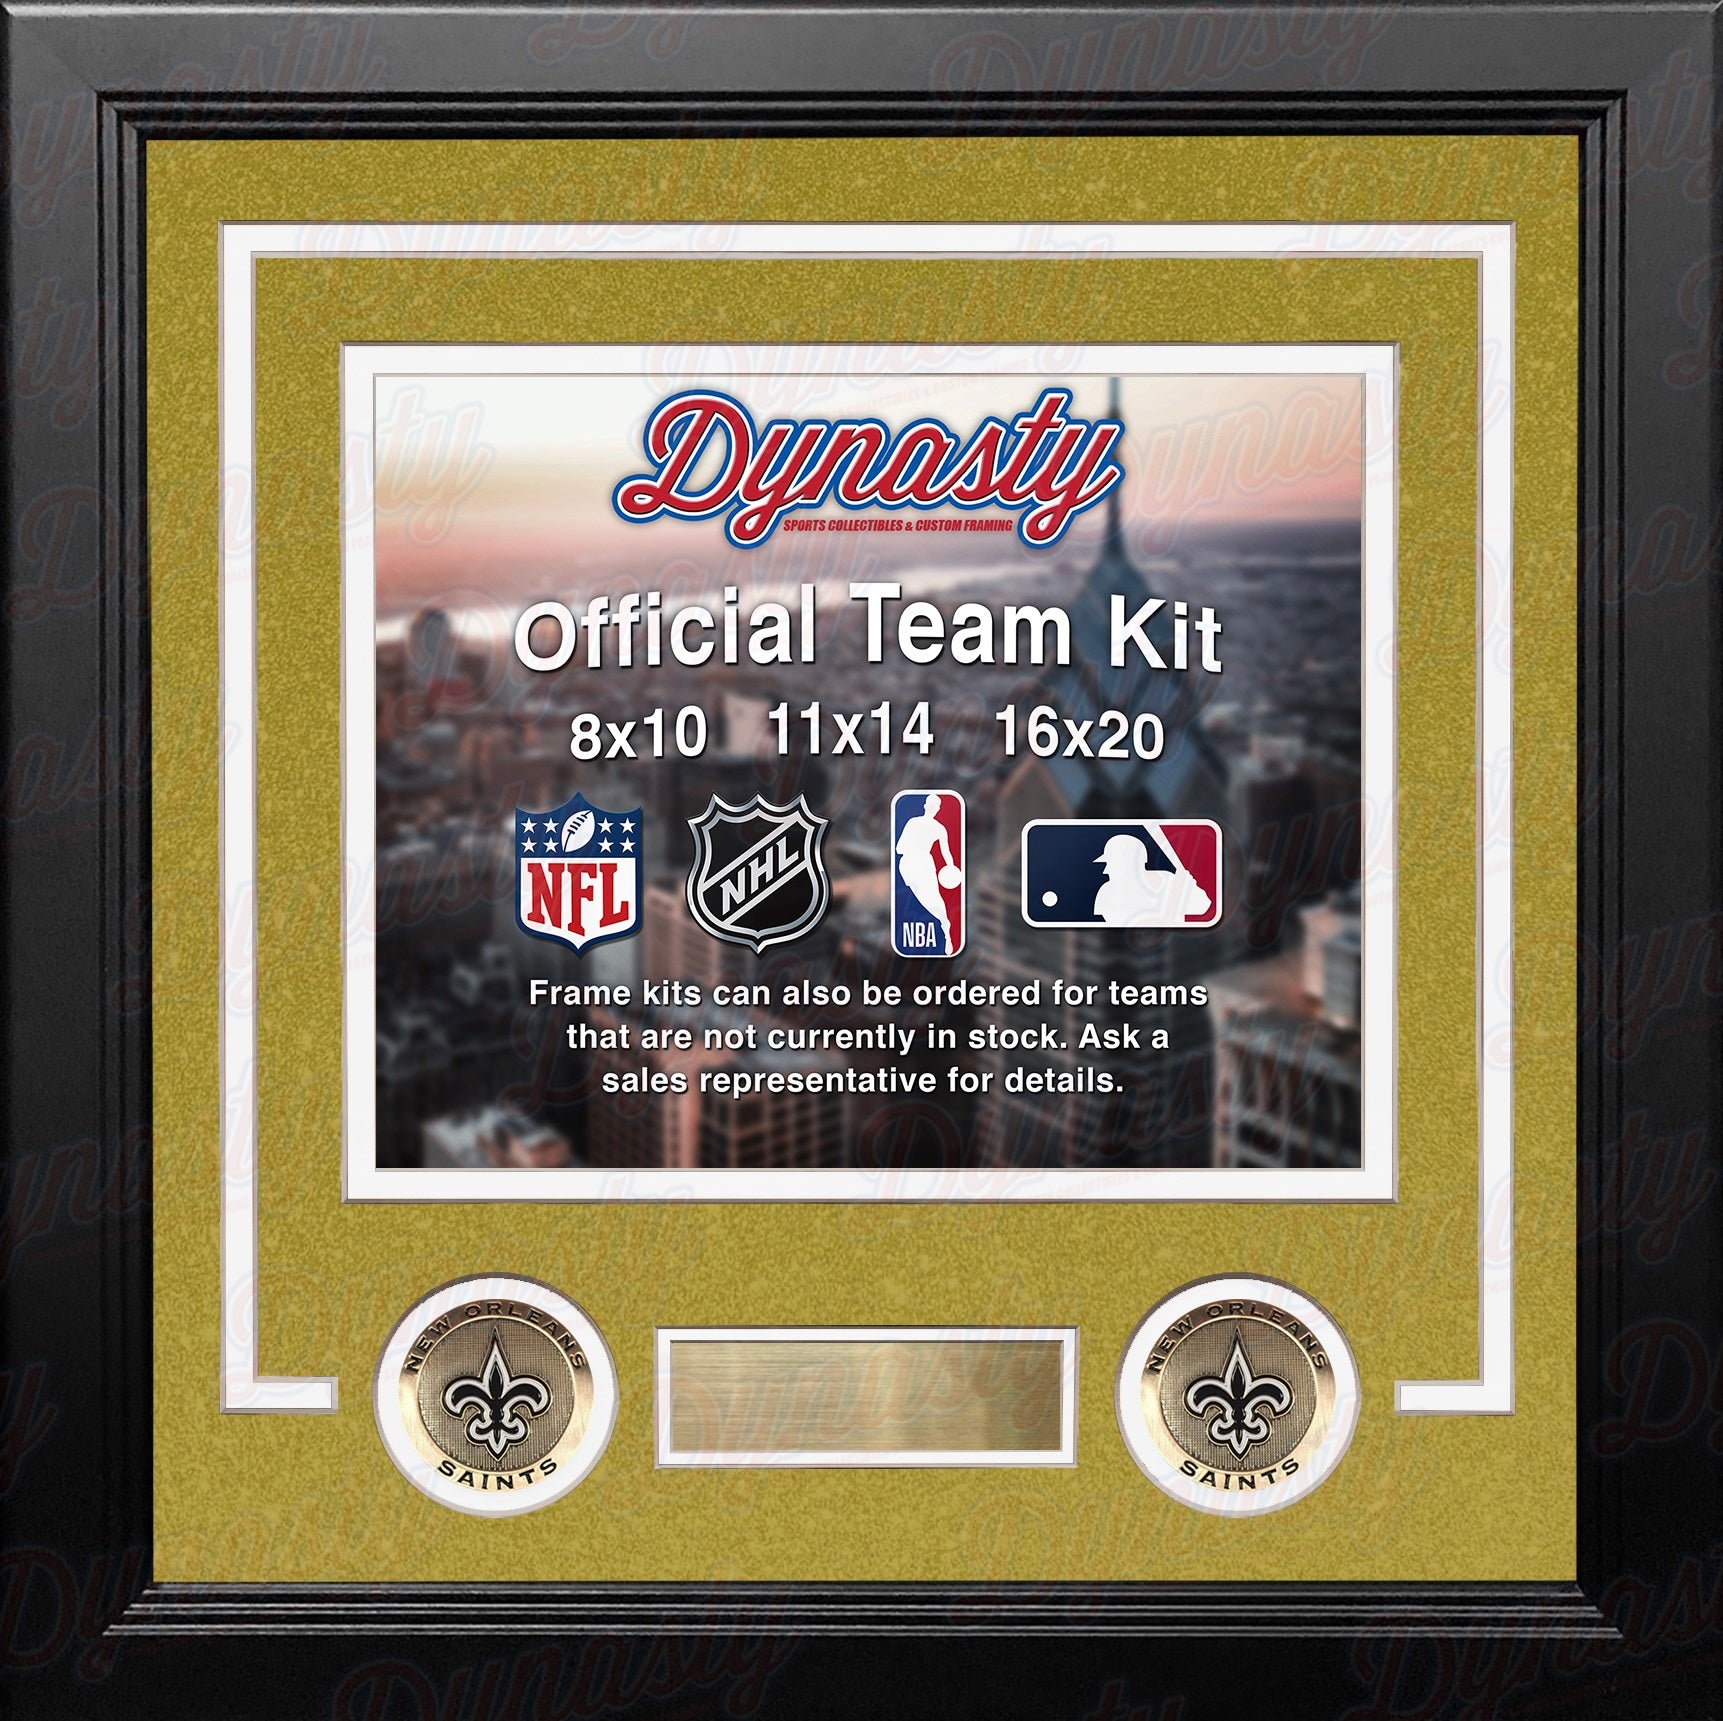 New Orleans Saints Custom NFL Football 11x14 Picture Frame Kit (Multiple Colors) - Dynasty Sports & Framing 